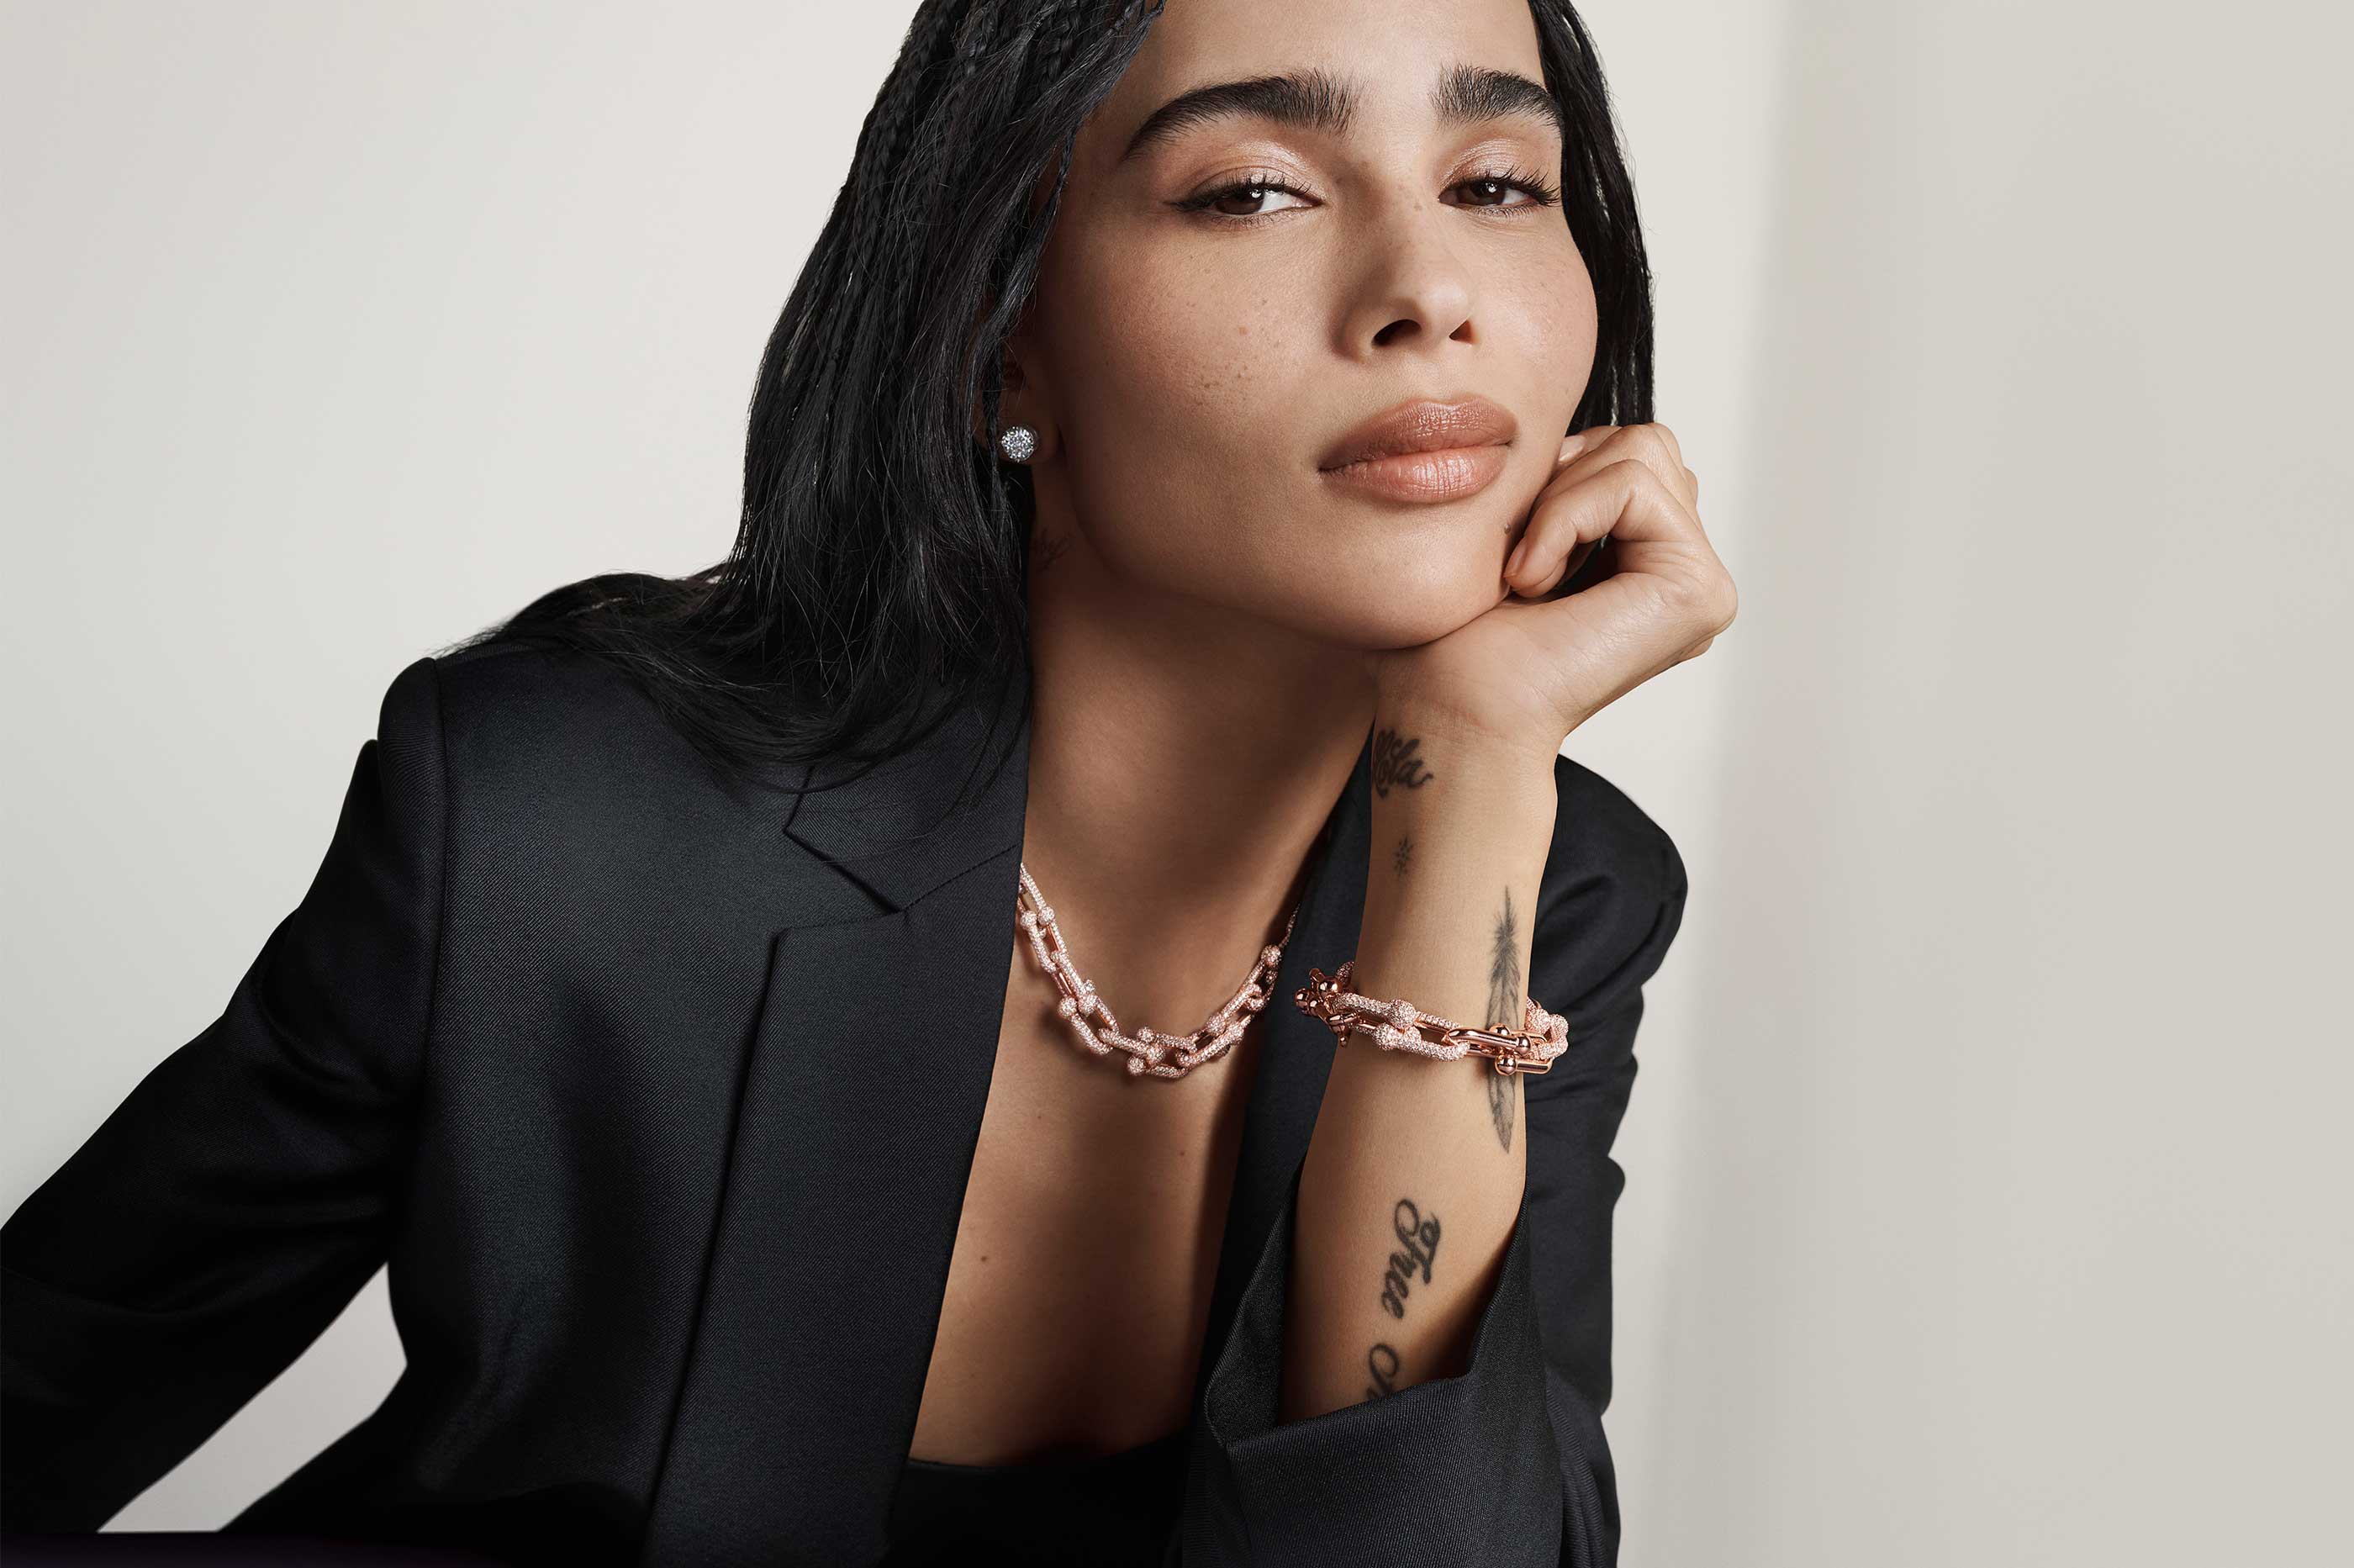 UPDATED TIFFANY & CO JEWELRY COLLECTION 2021 